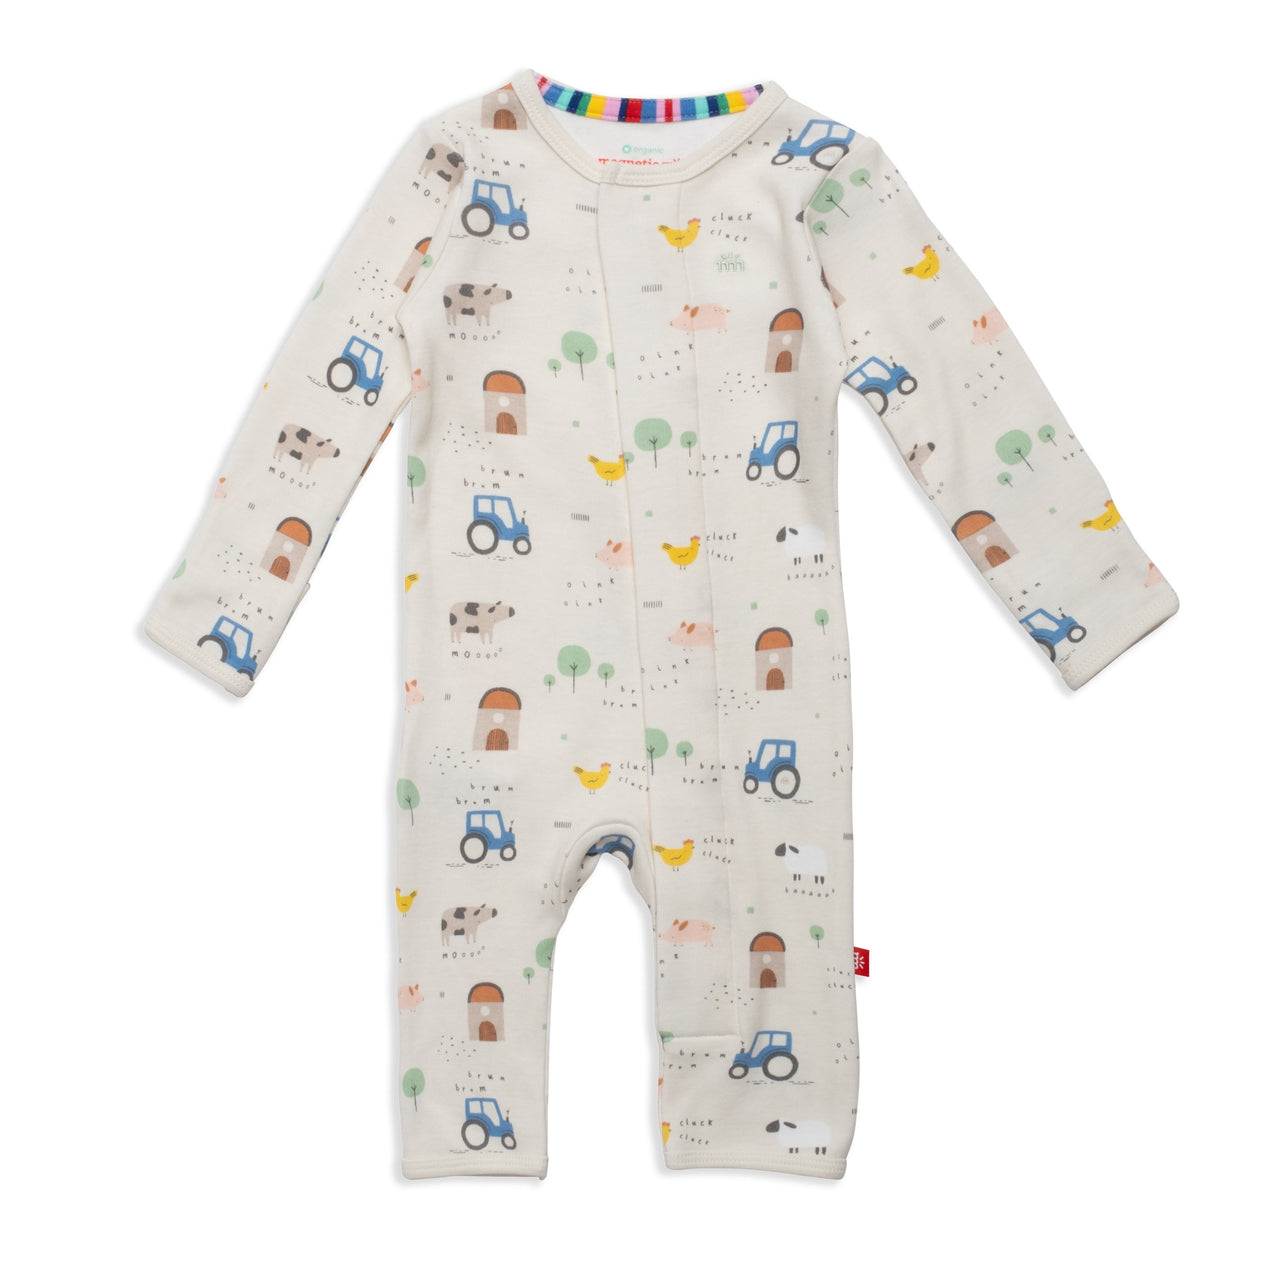 Magnetic Me Pasture Bedtime Coverall MS14OC04PB 5101